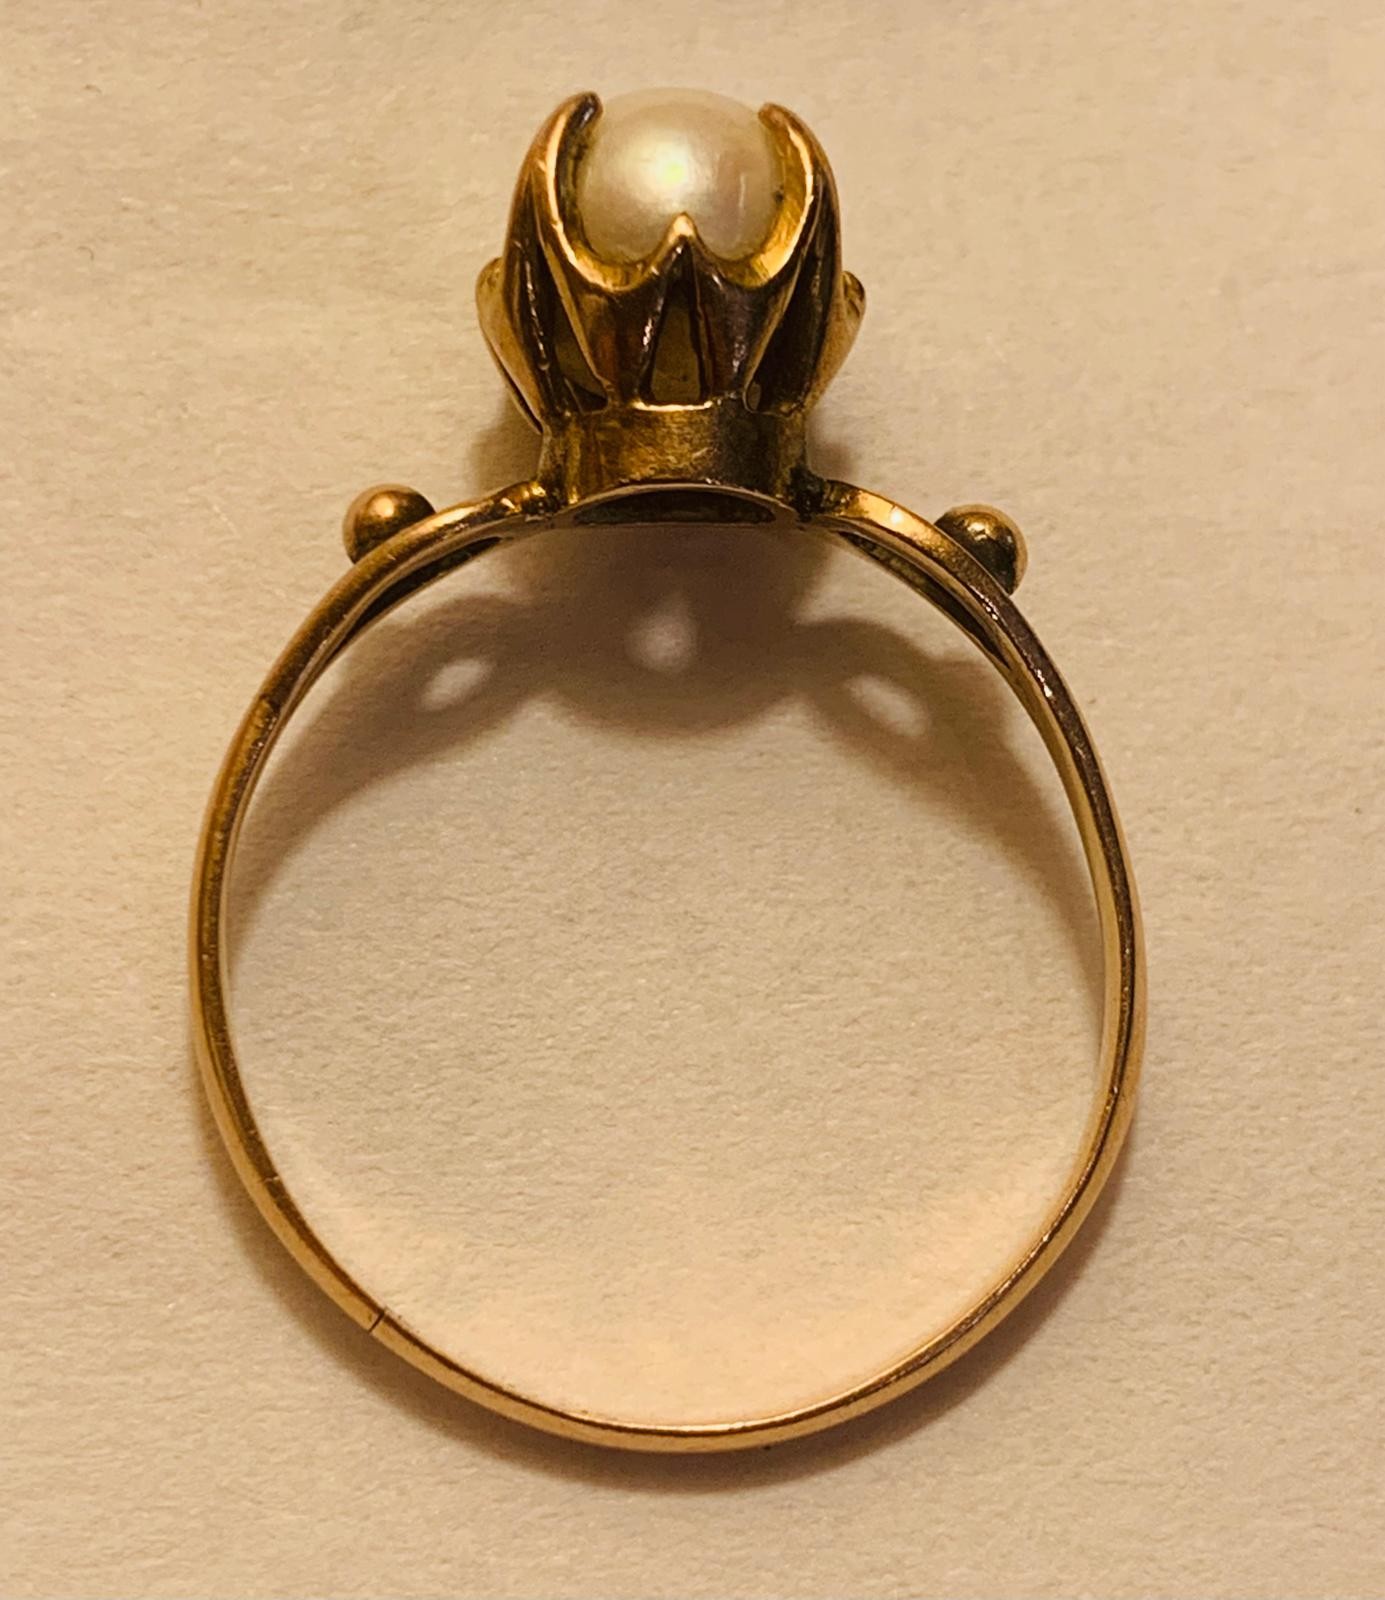 18ct GOLD RING SET WITH NATURAL PEARL, HAS BEEN RESIZED, SIZE Q, TOTAL WEIGHT APPROX 2.29g - Image 5 of 5